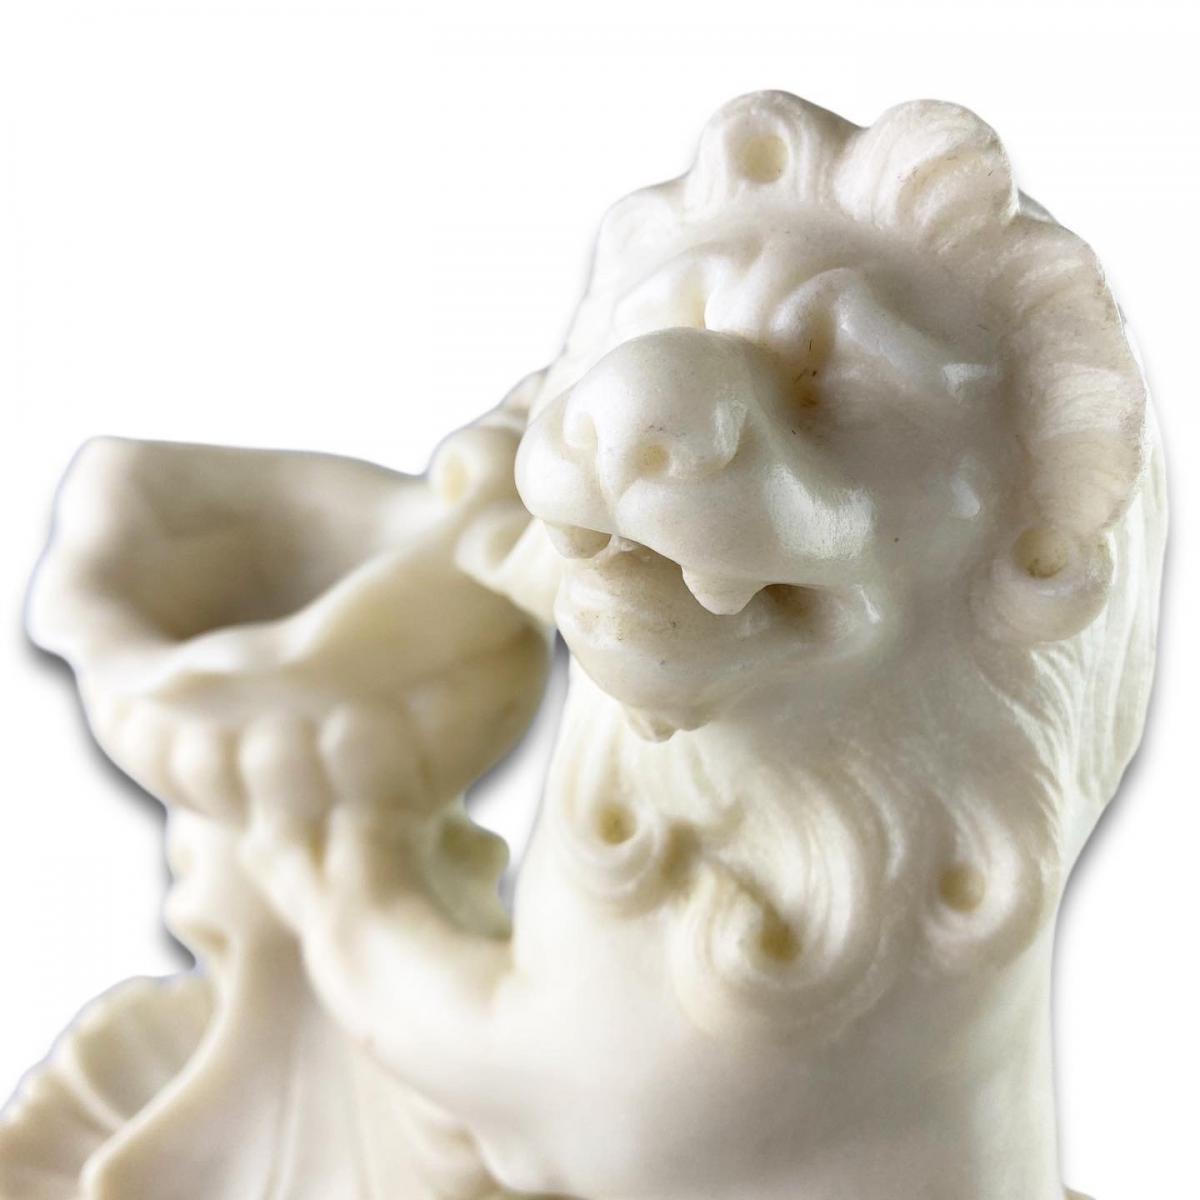 A large marble table salt of a lion. French, first half of the 19th century